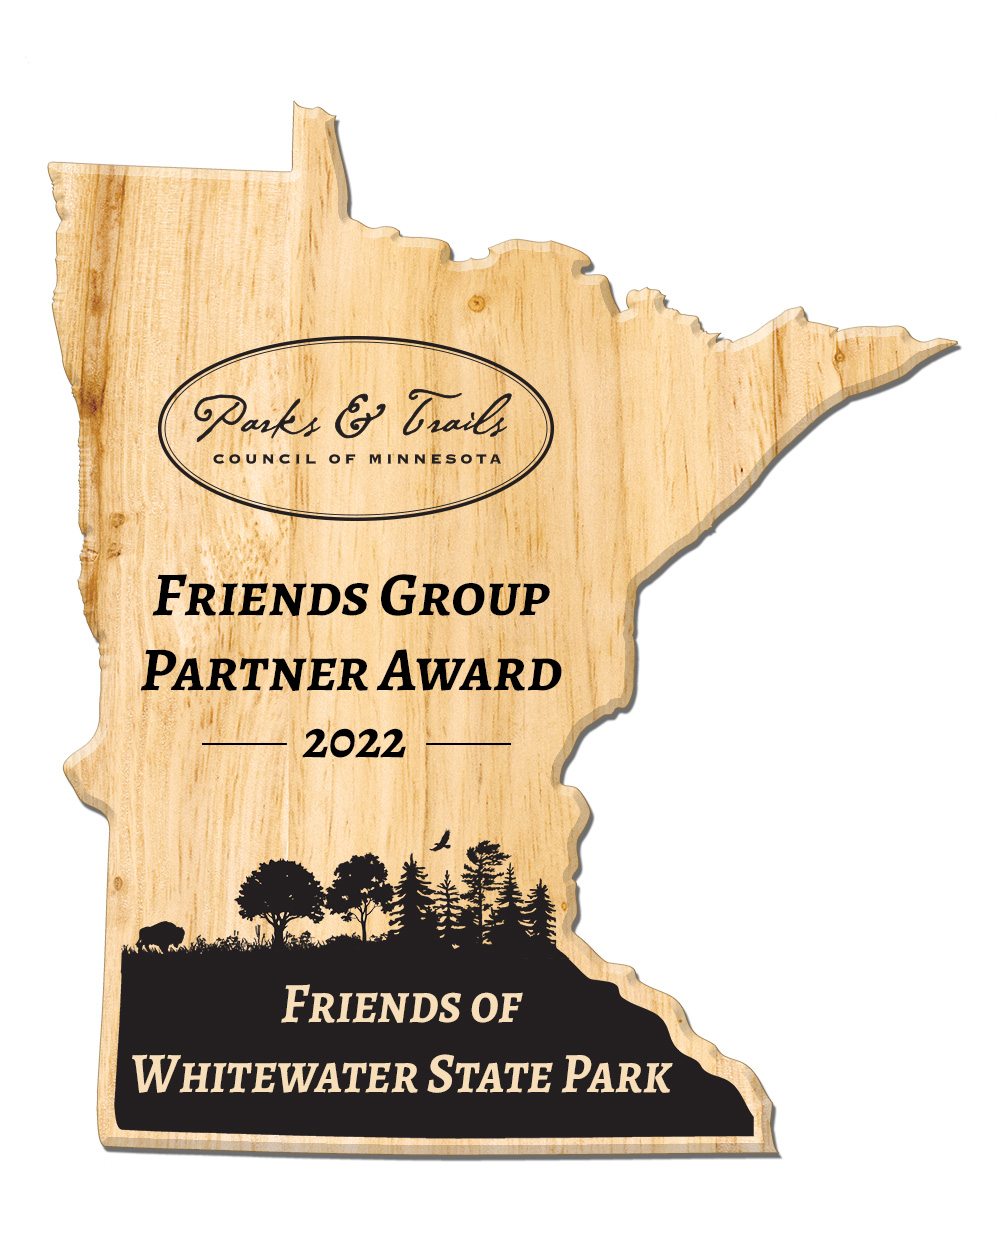 Wooden plaque in shape of Minnesota engraved with "Friends of Whitewater State Park"